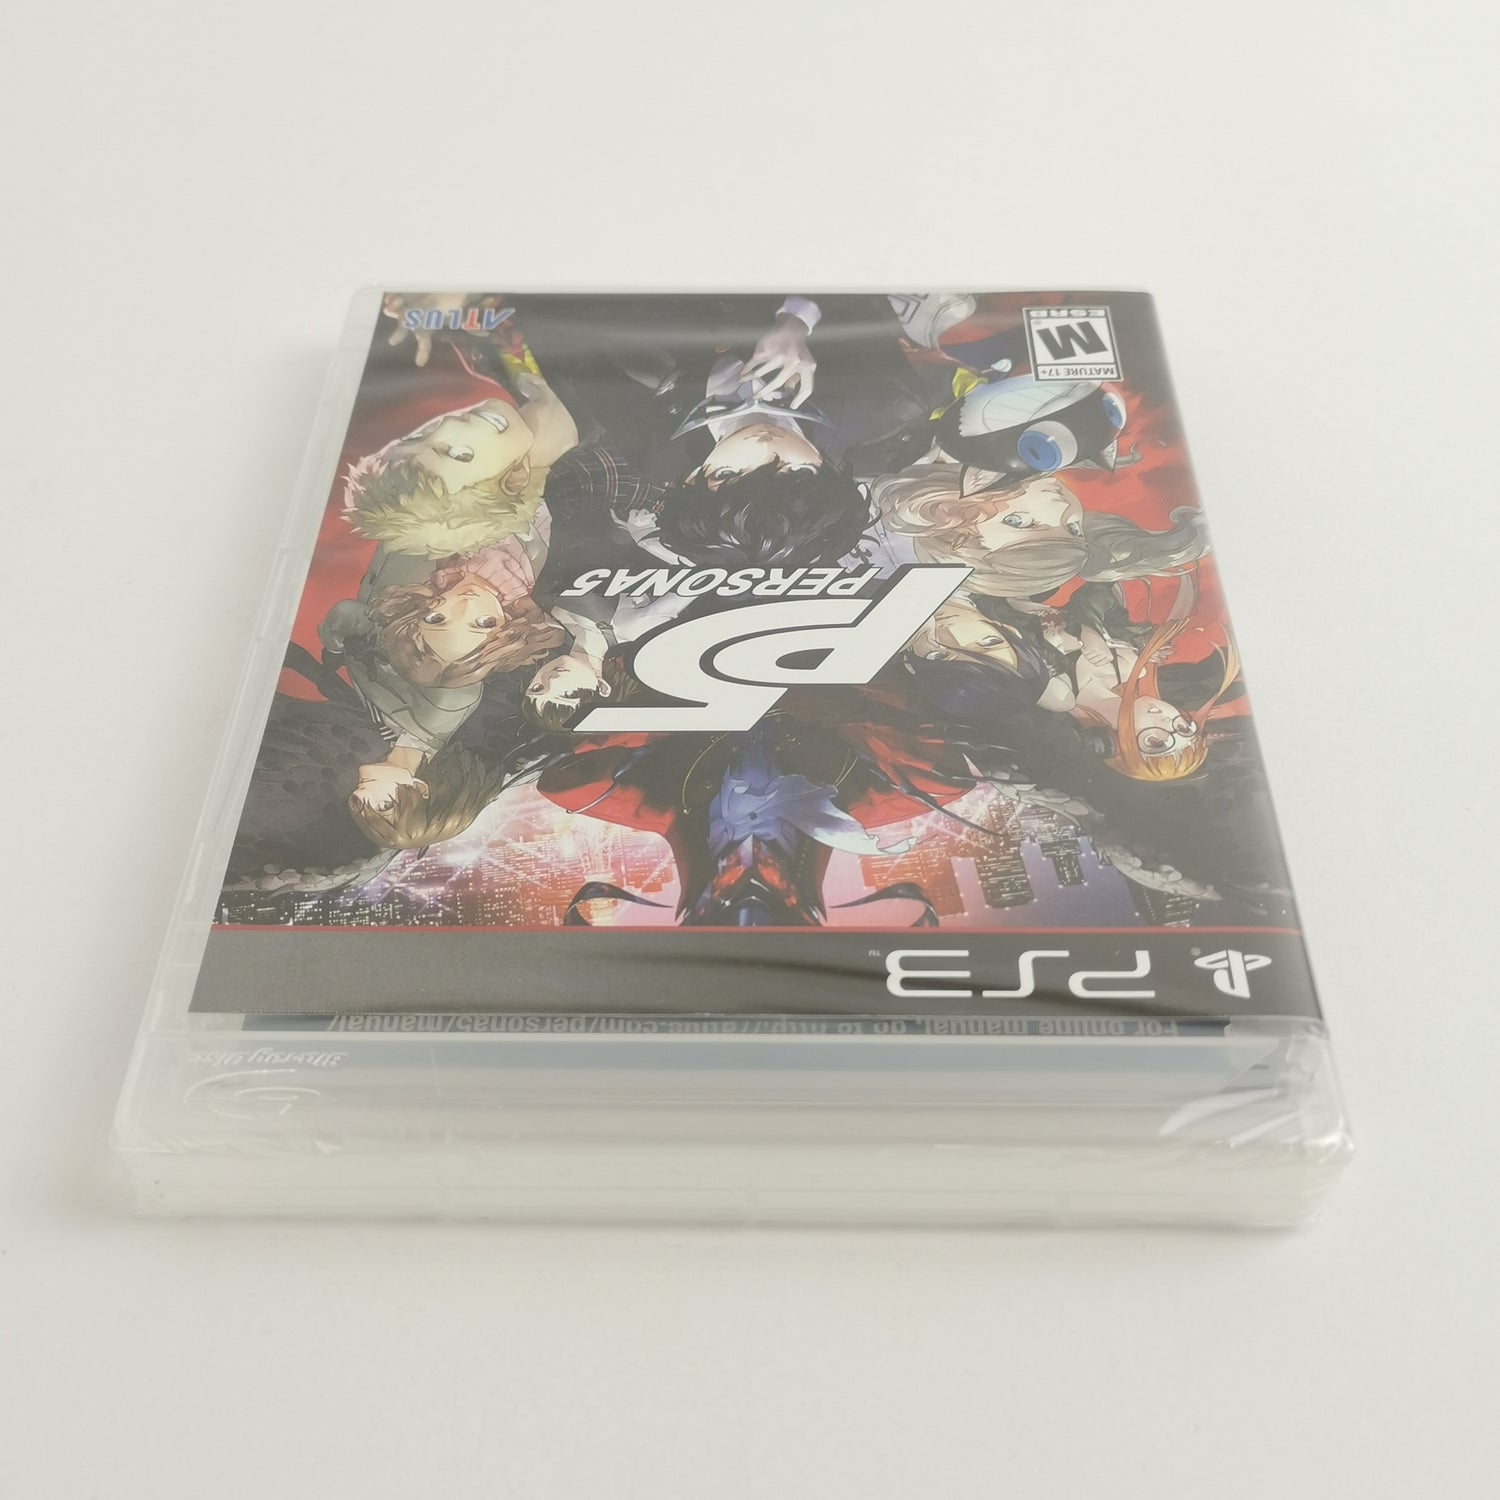 Sony Playstation 3 Game : P5 Persona 5 | PS3 - OVP NEW NEW SEALED